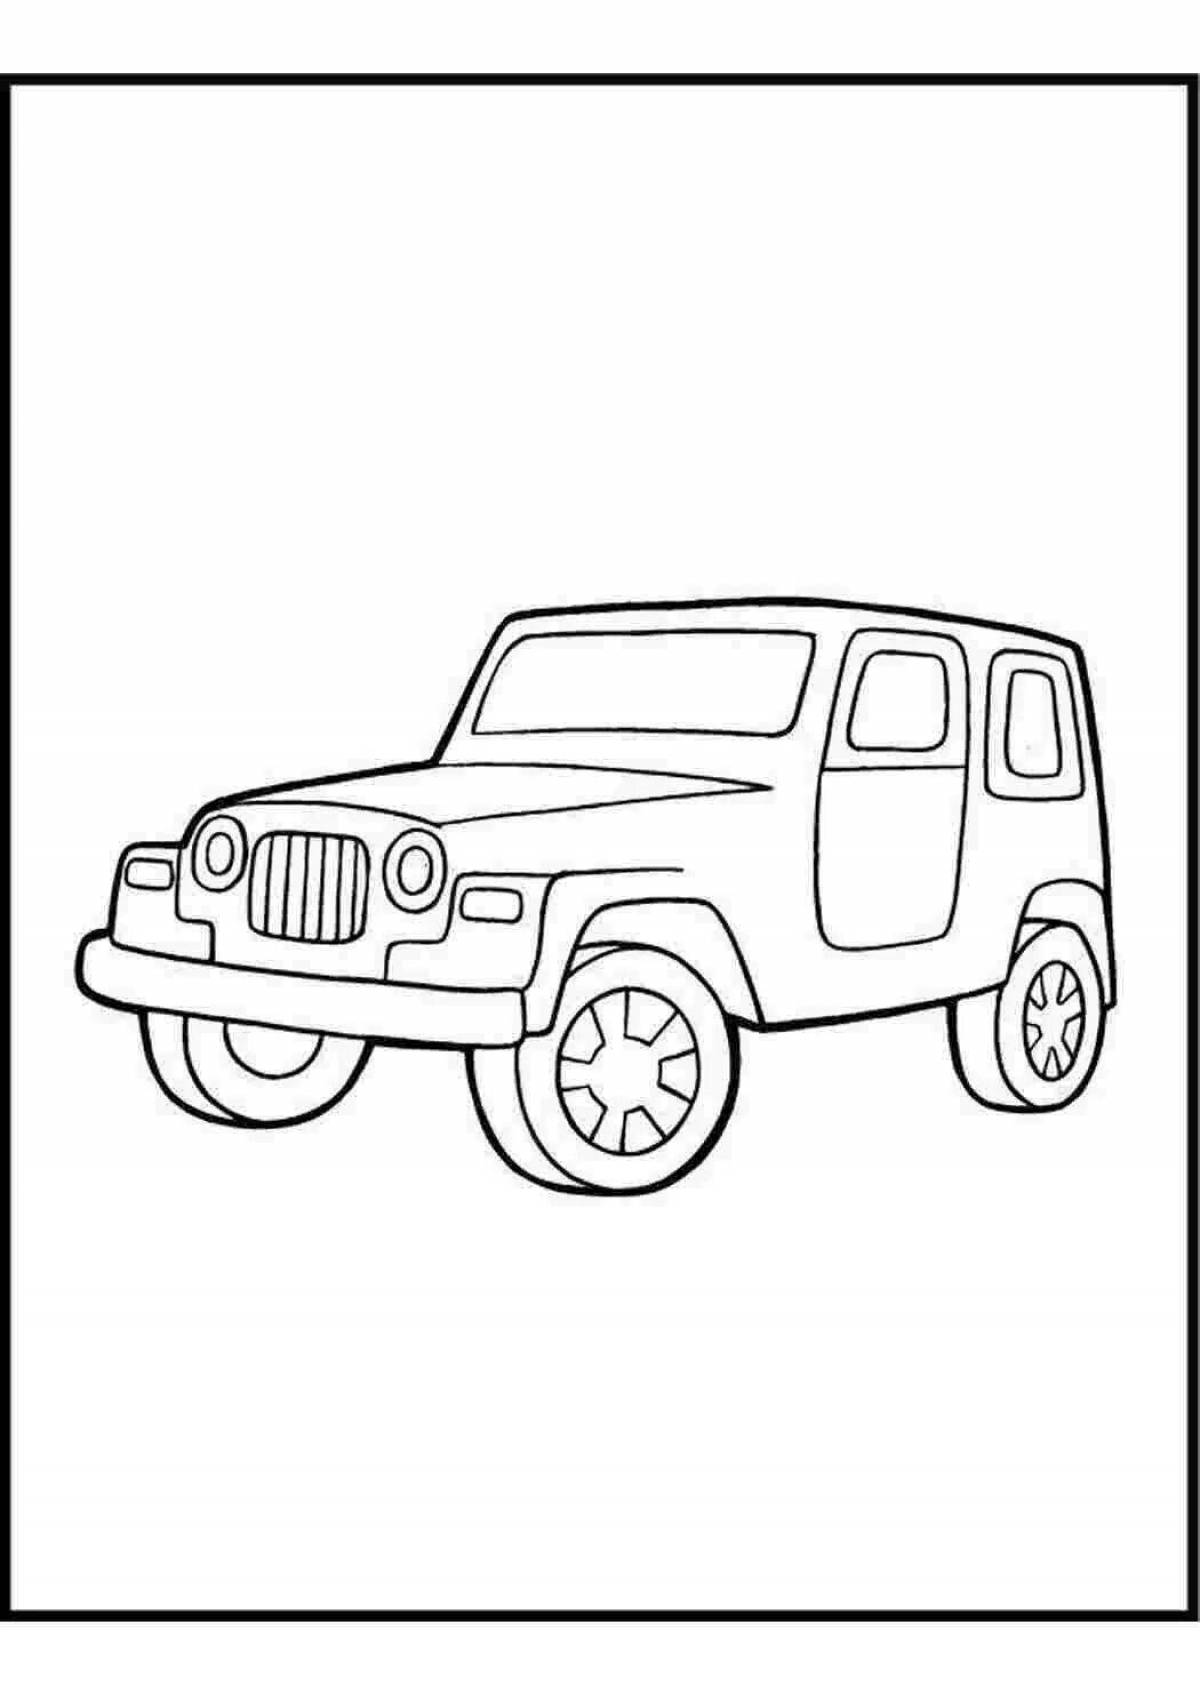 UAZ bright coloring for kids